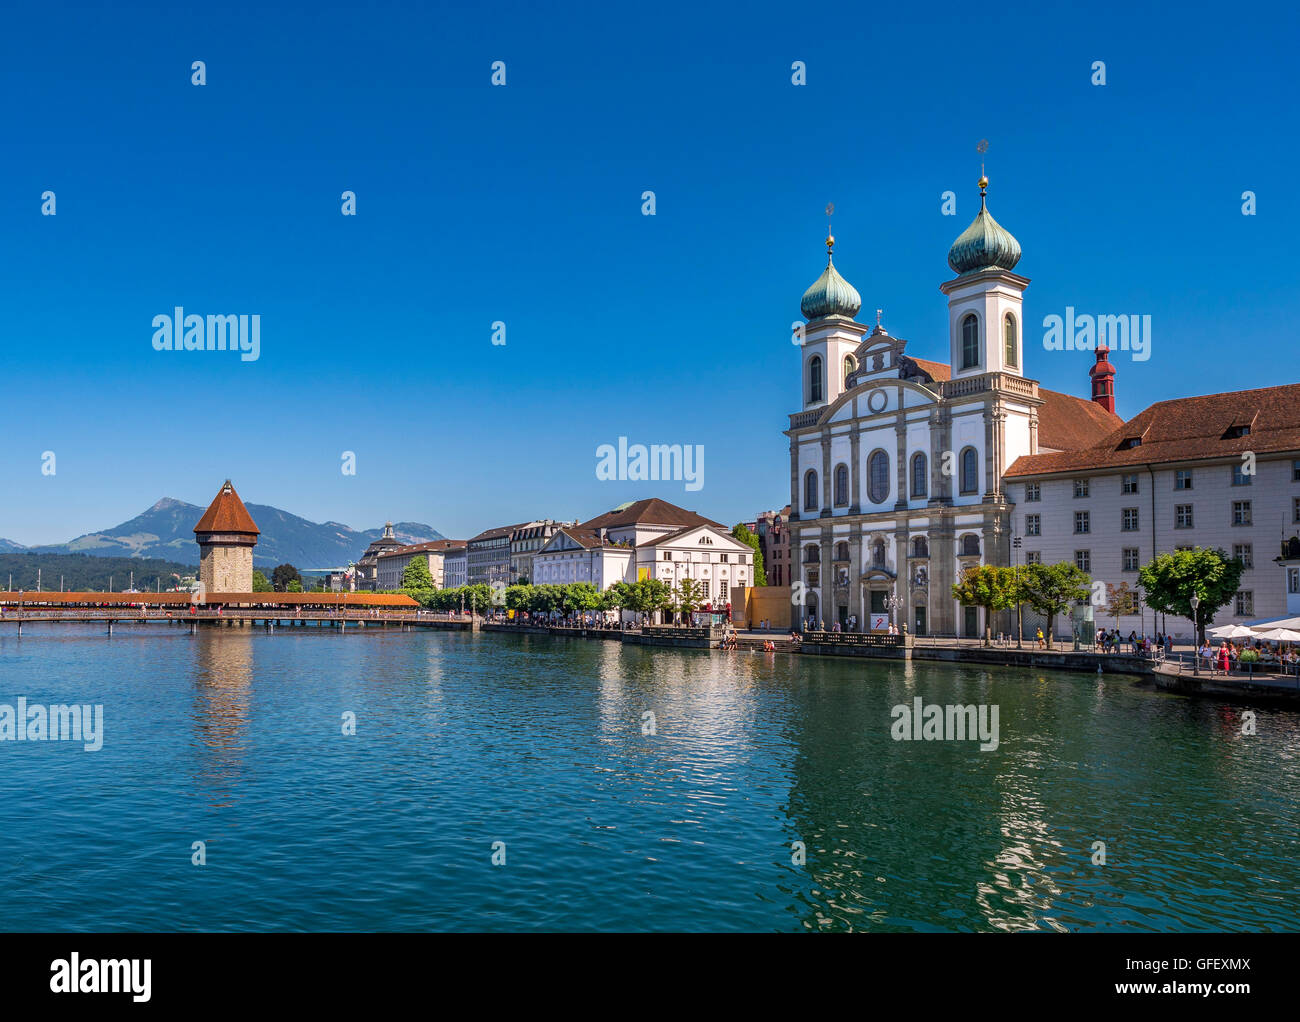 Jesuit Church and Chapel Bridge on the River Reuss in Lucerne, Switzerland, Europe Stock Photo